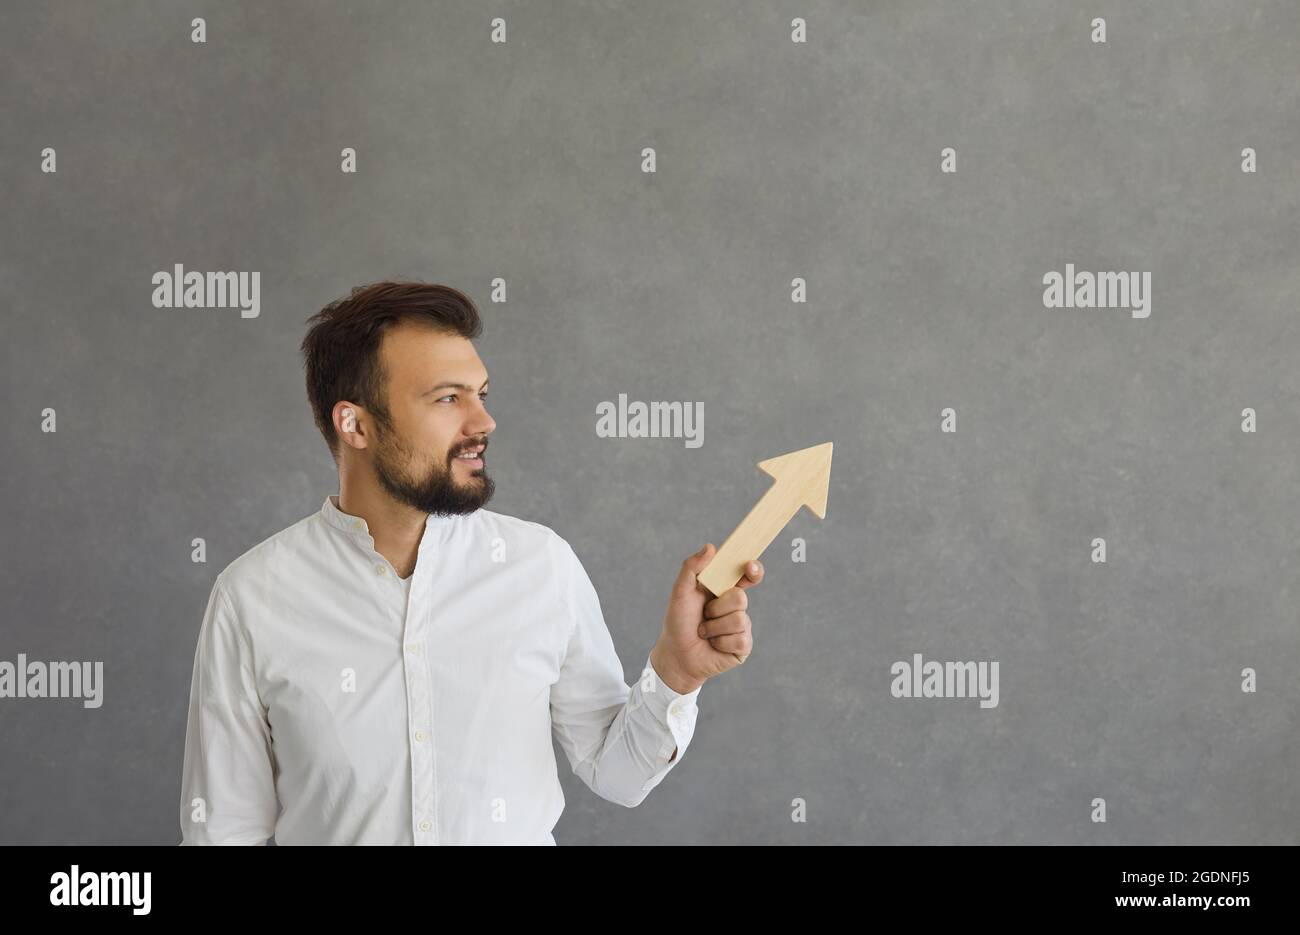 Man holds a wooden arrow in his hands, which points upwards and symbolizes the achievement of goals. Stock Photo